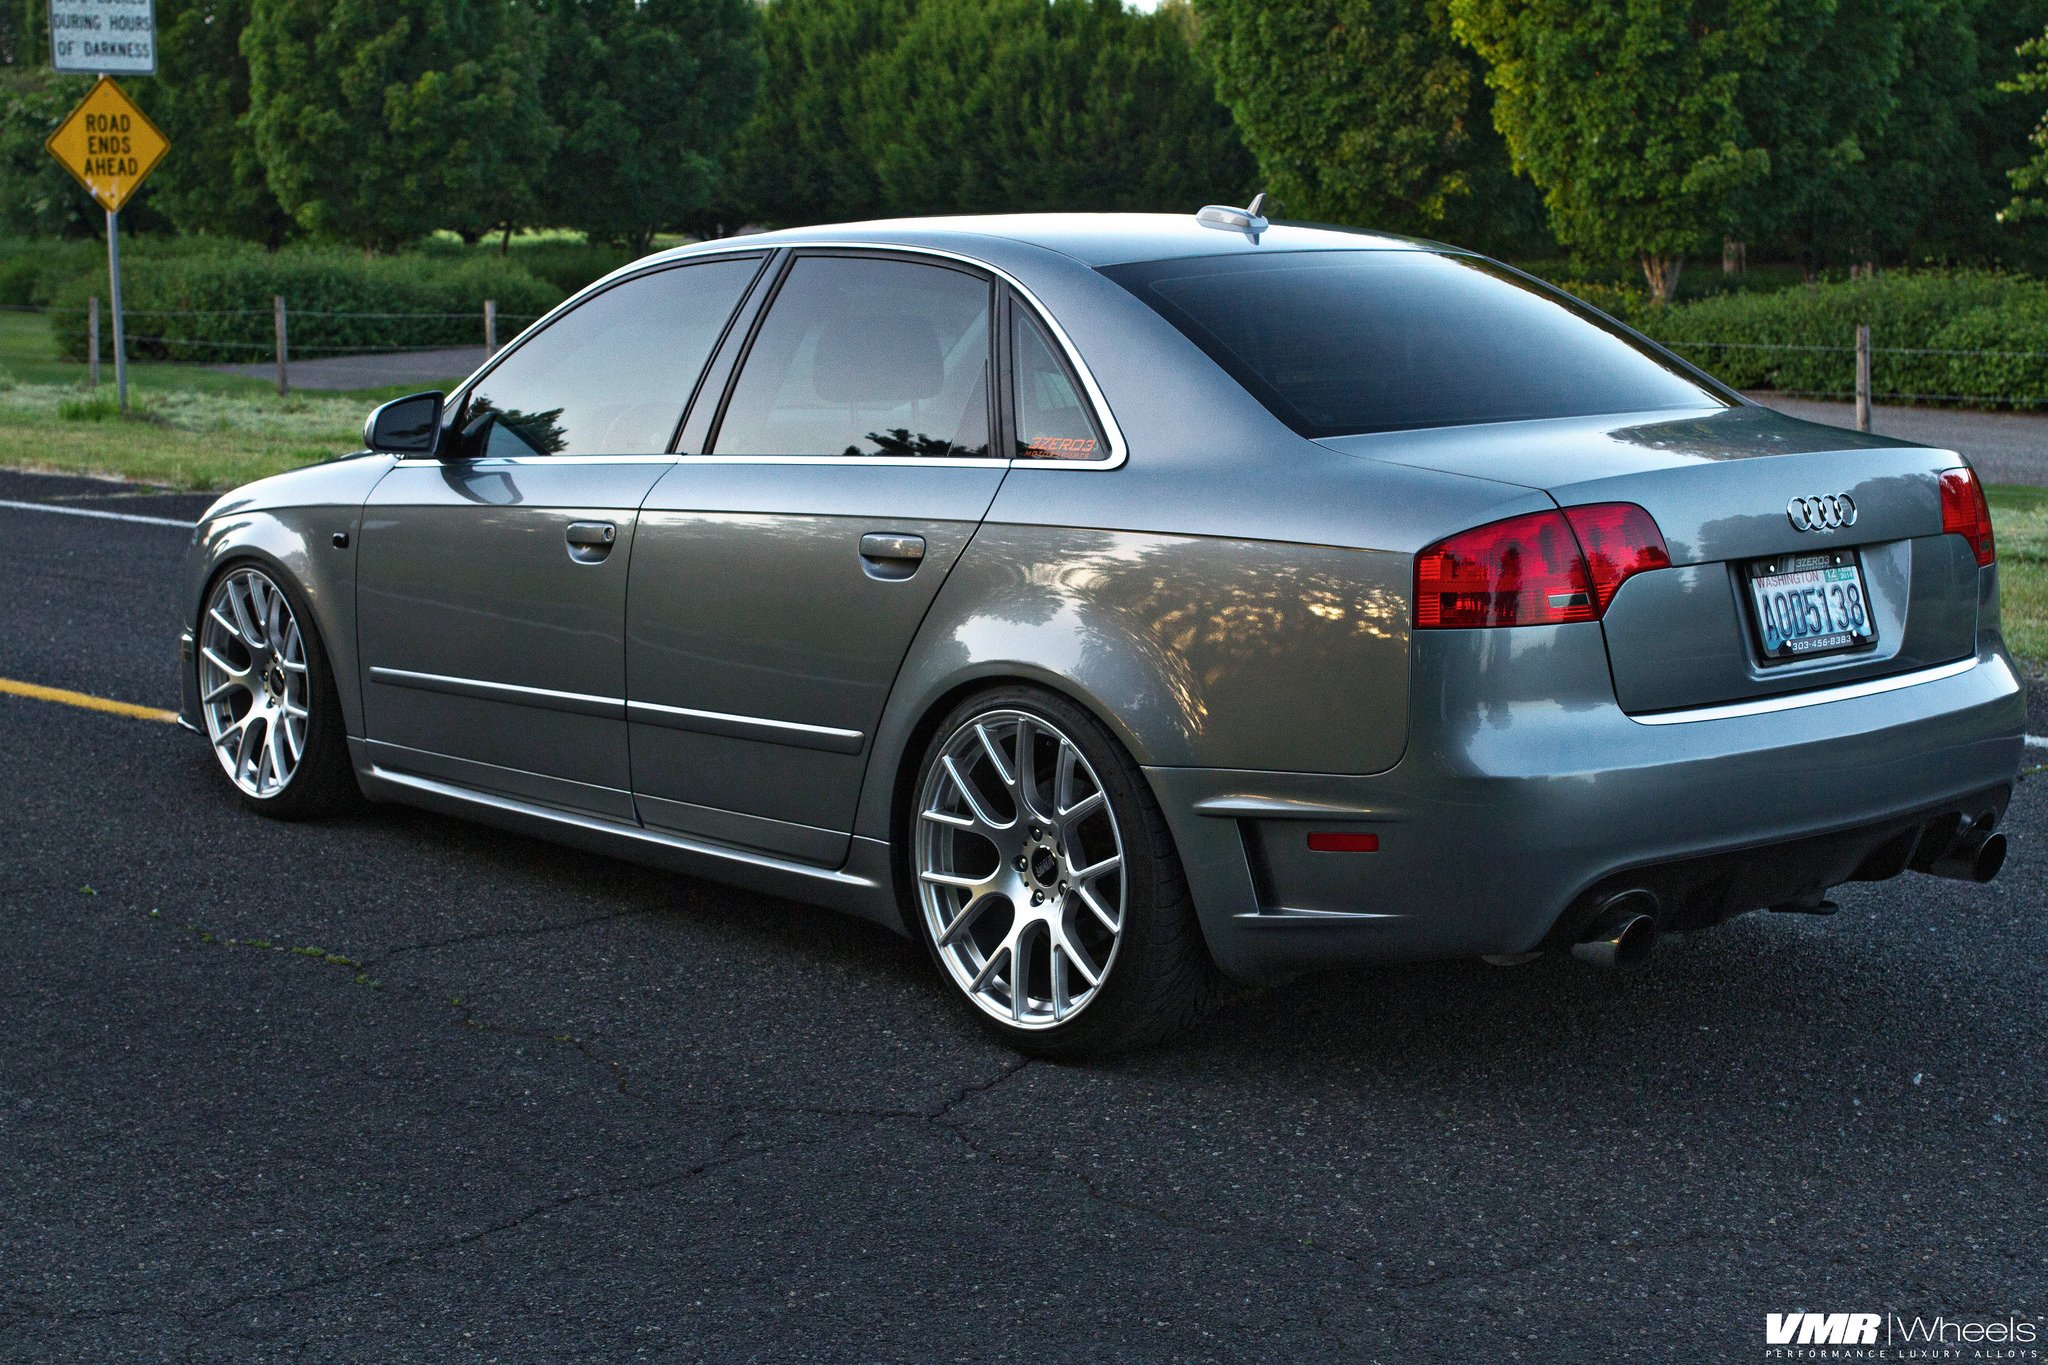 Б 7.4. Audi a4 b7. Audi a4 b7 avant Tuning. Audi a4 b7 r19. Audi a4 b7 (s4,rs4).